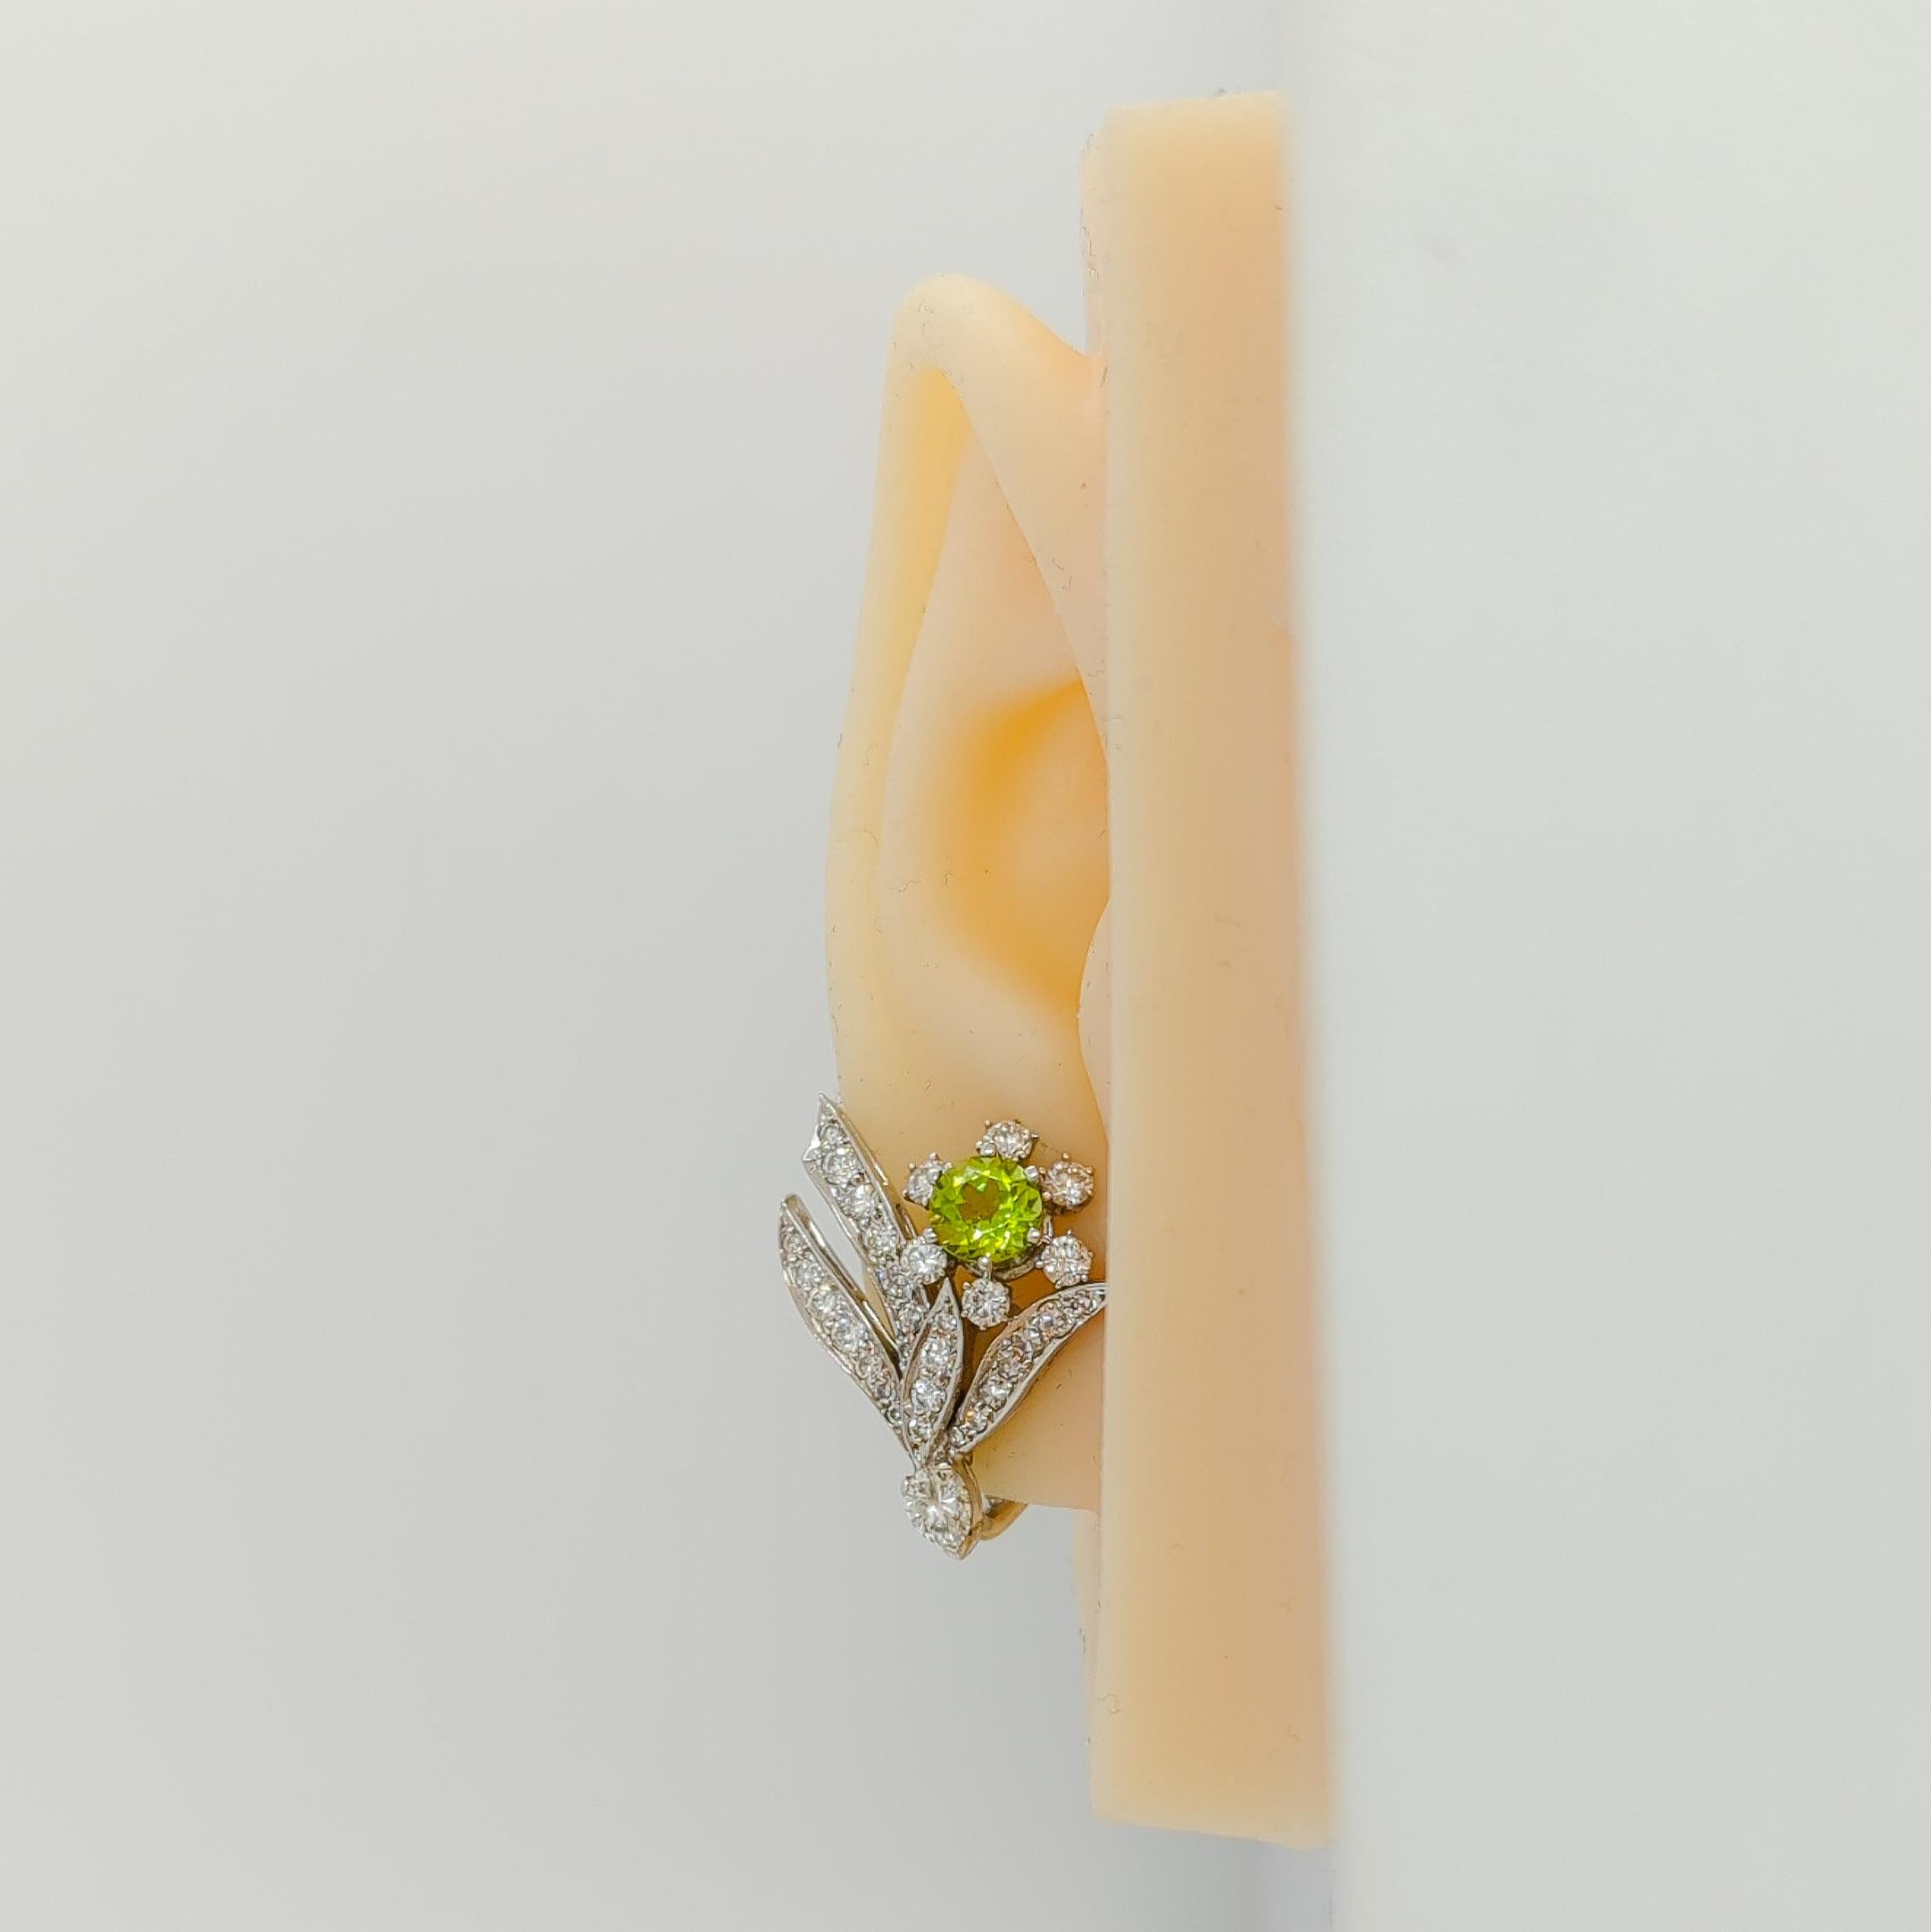 Beautiful earrings with 1.25 ct. peridot rounds, good quality white diamond rounds, and marquises.  Handmade in platinum.  These flower earrings are a great addition to any fine jewelry collection.